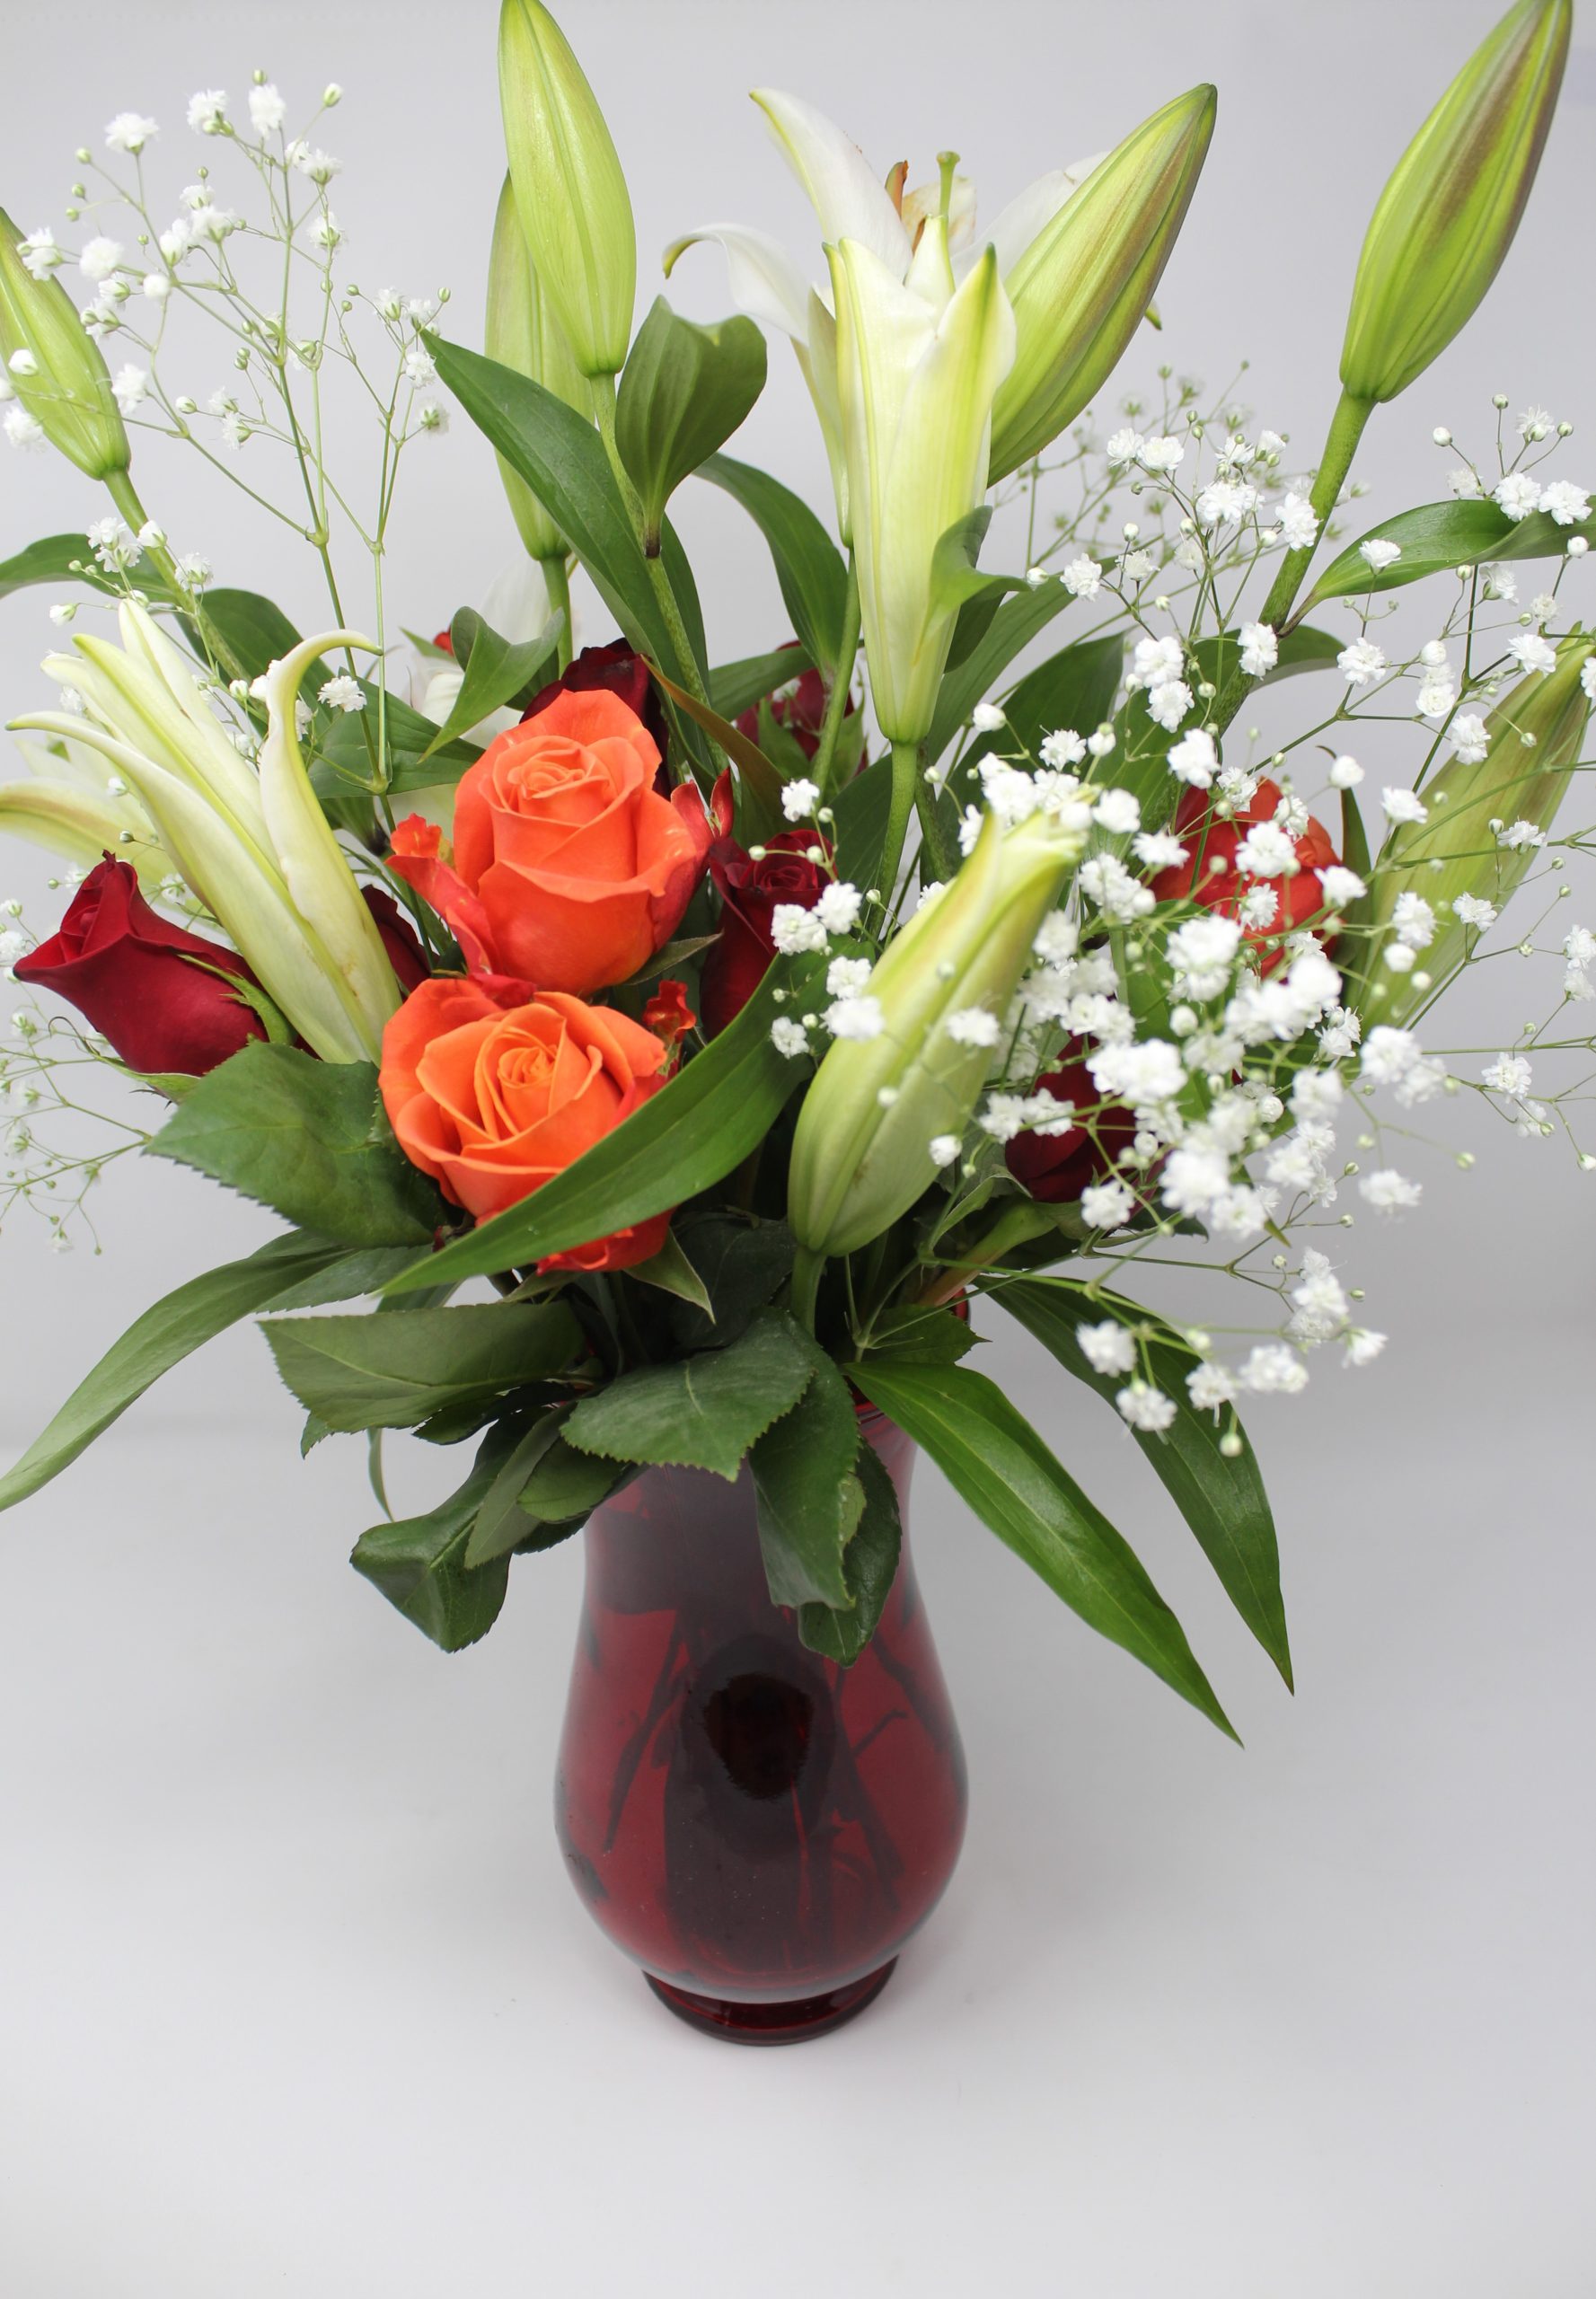 Midshot of a vase with white lilies, orange and red roses, and other flowers.